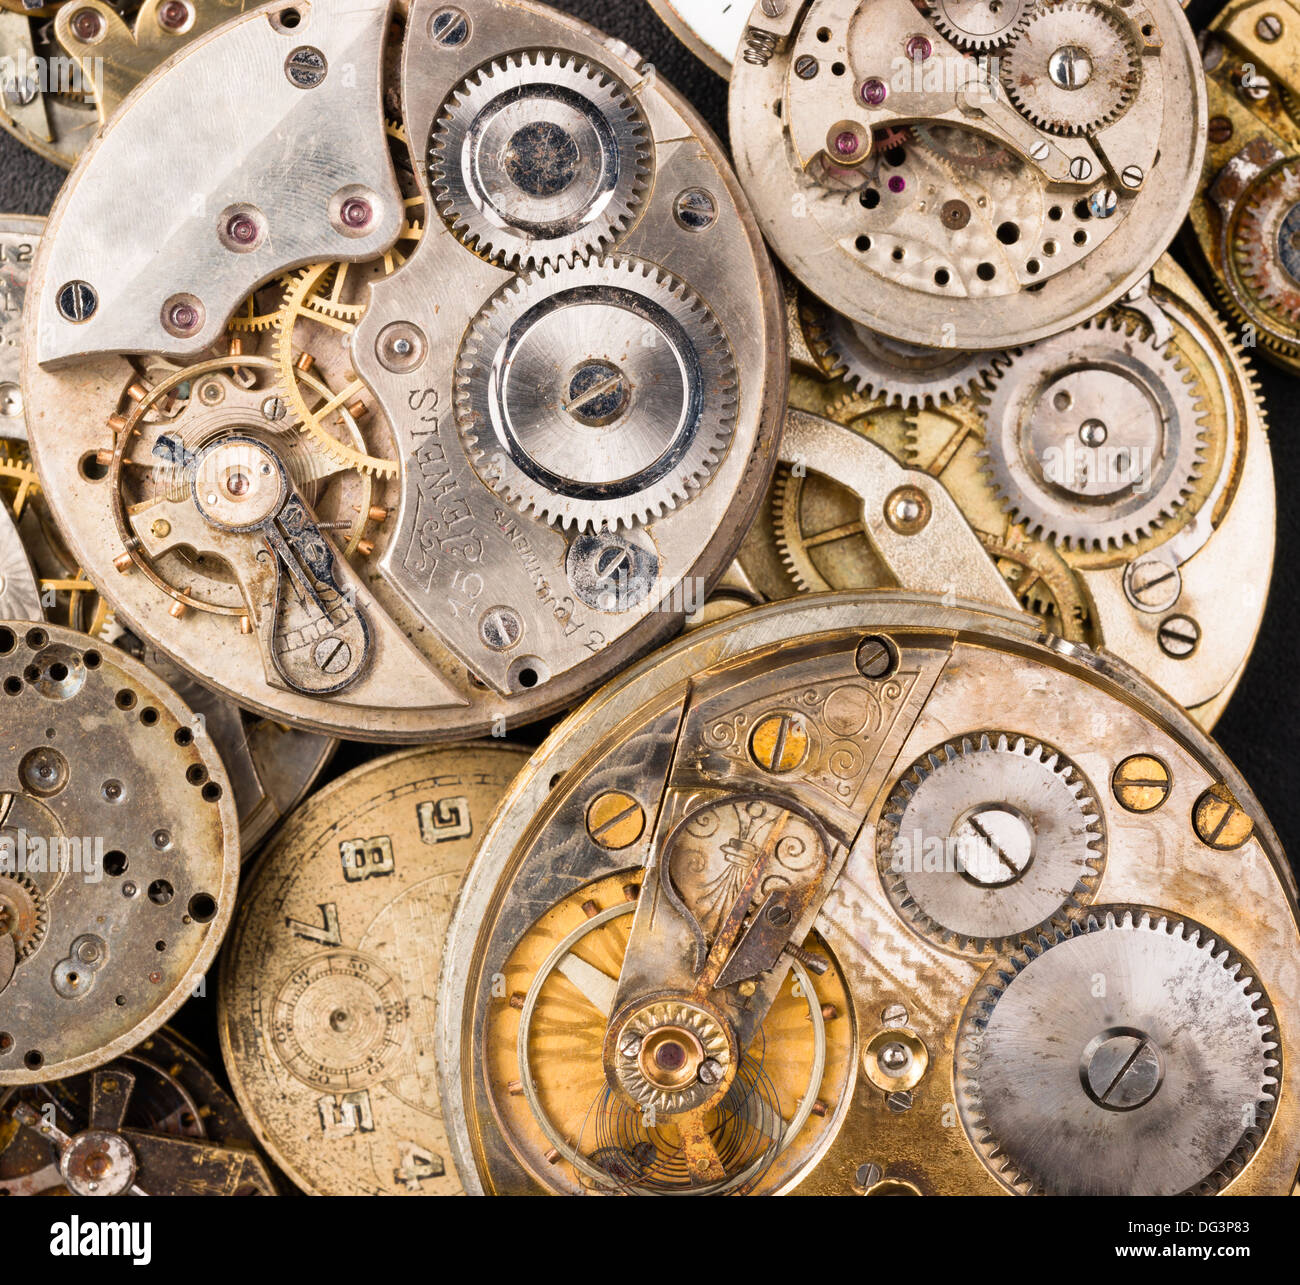 A Pile Of Old Pocket Watches In Various States Stock Photo Alamy